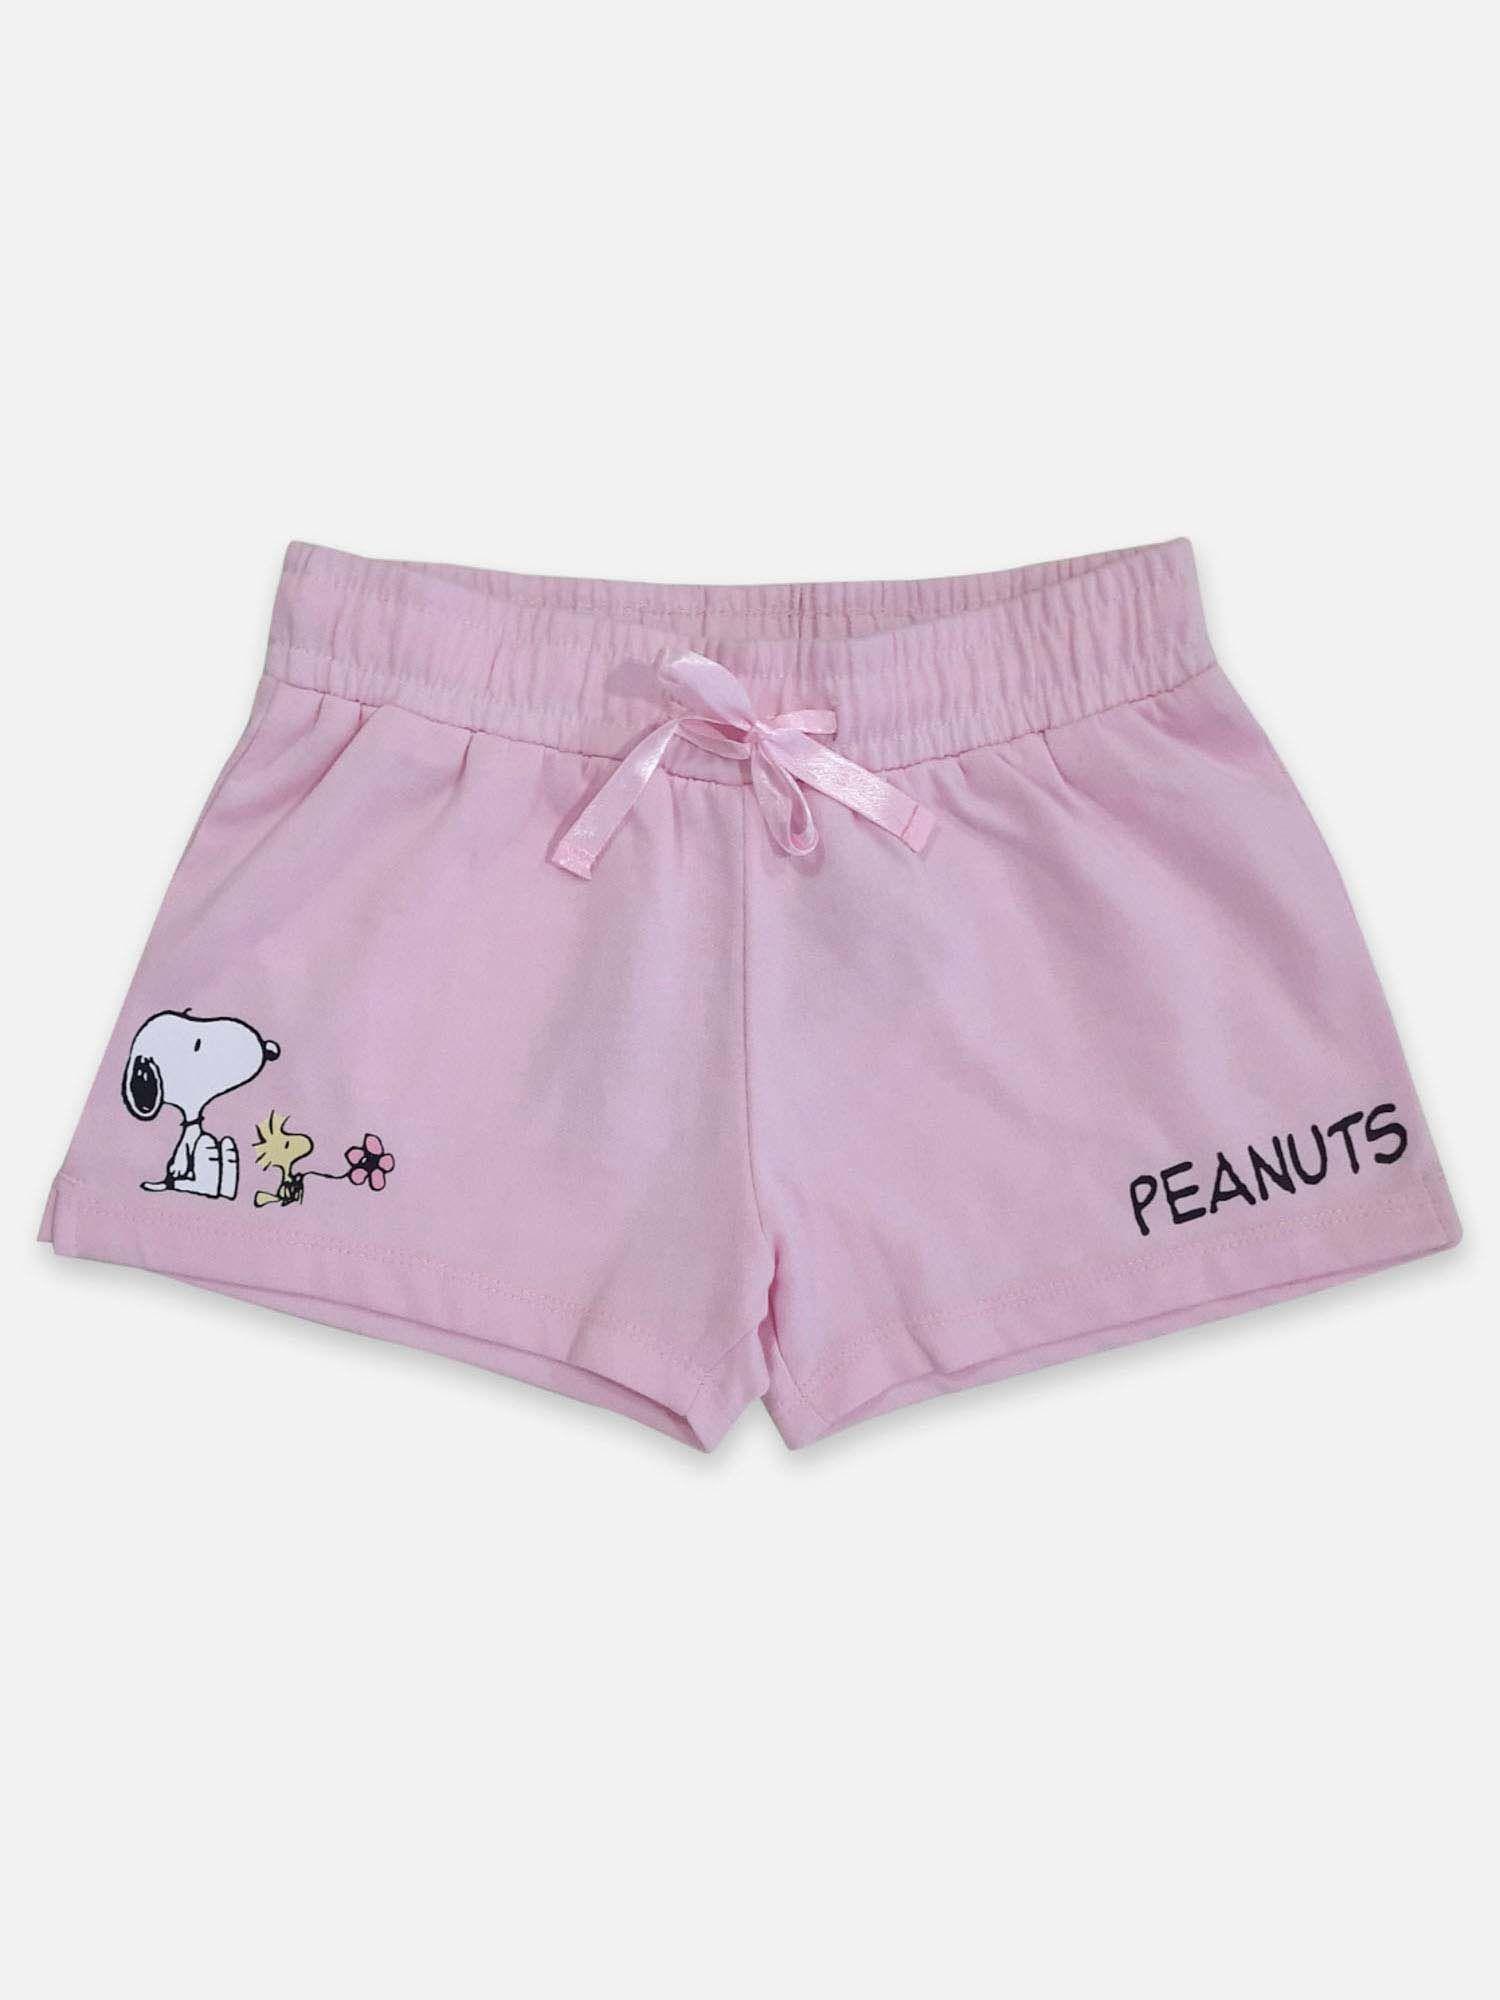 peanuts-featured-shorts-for-girls---pink